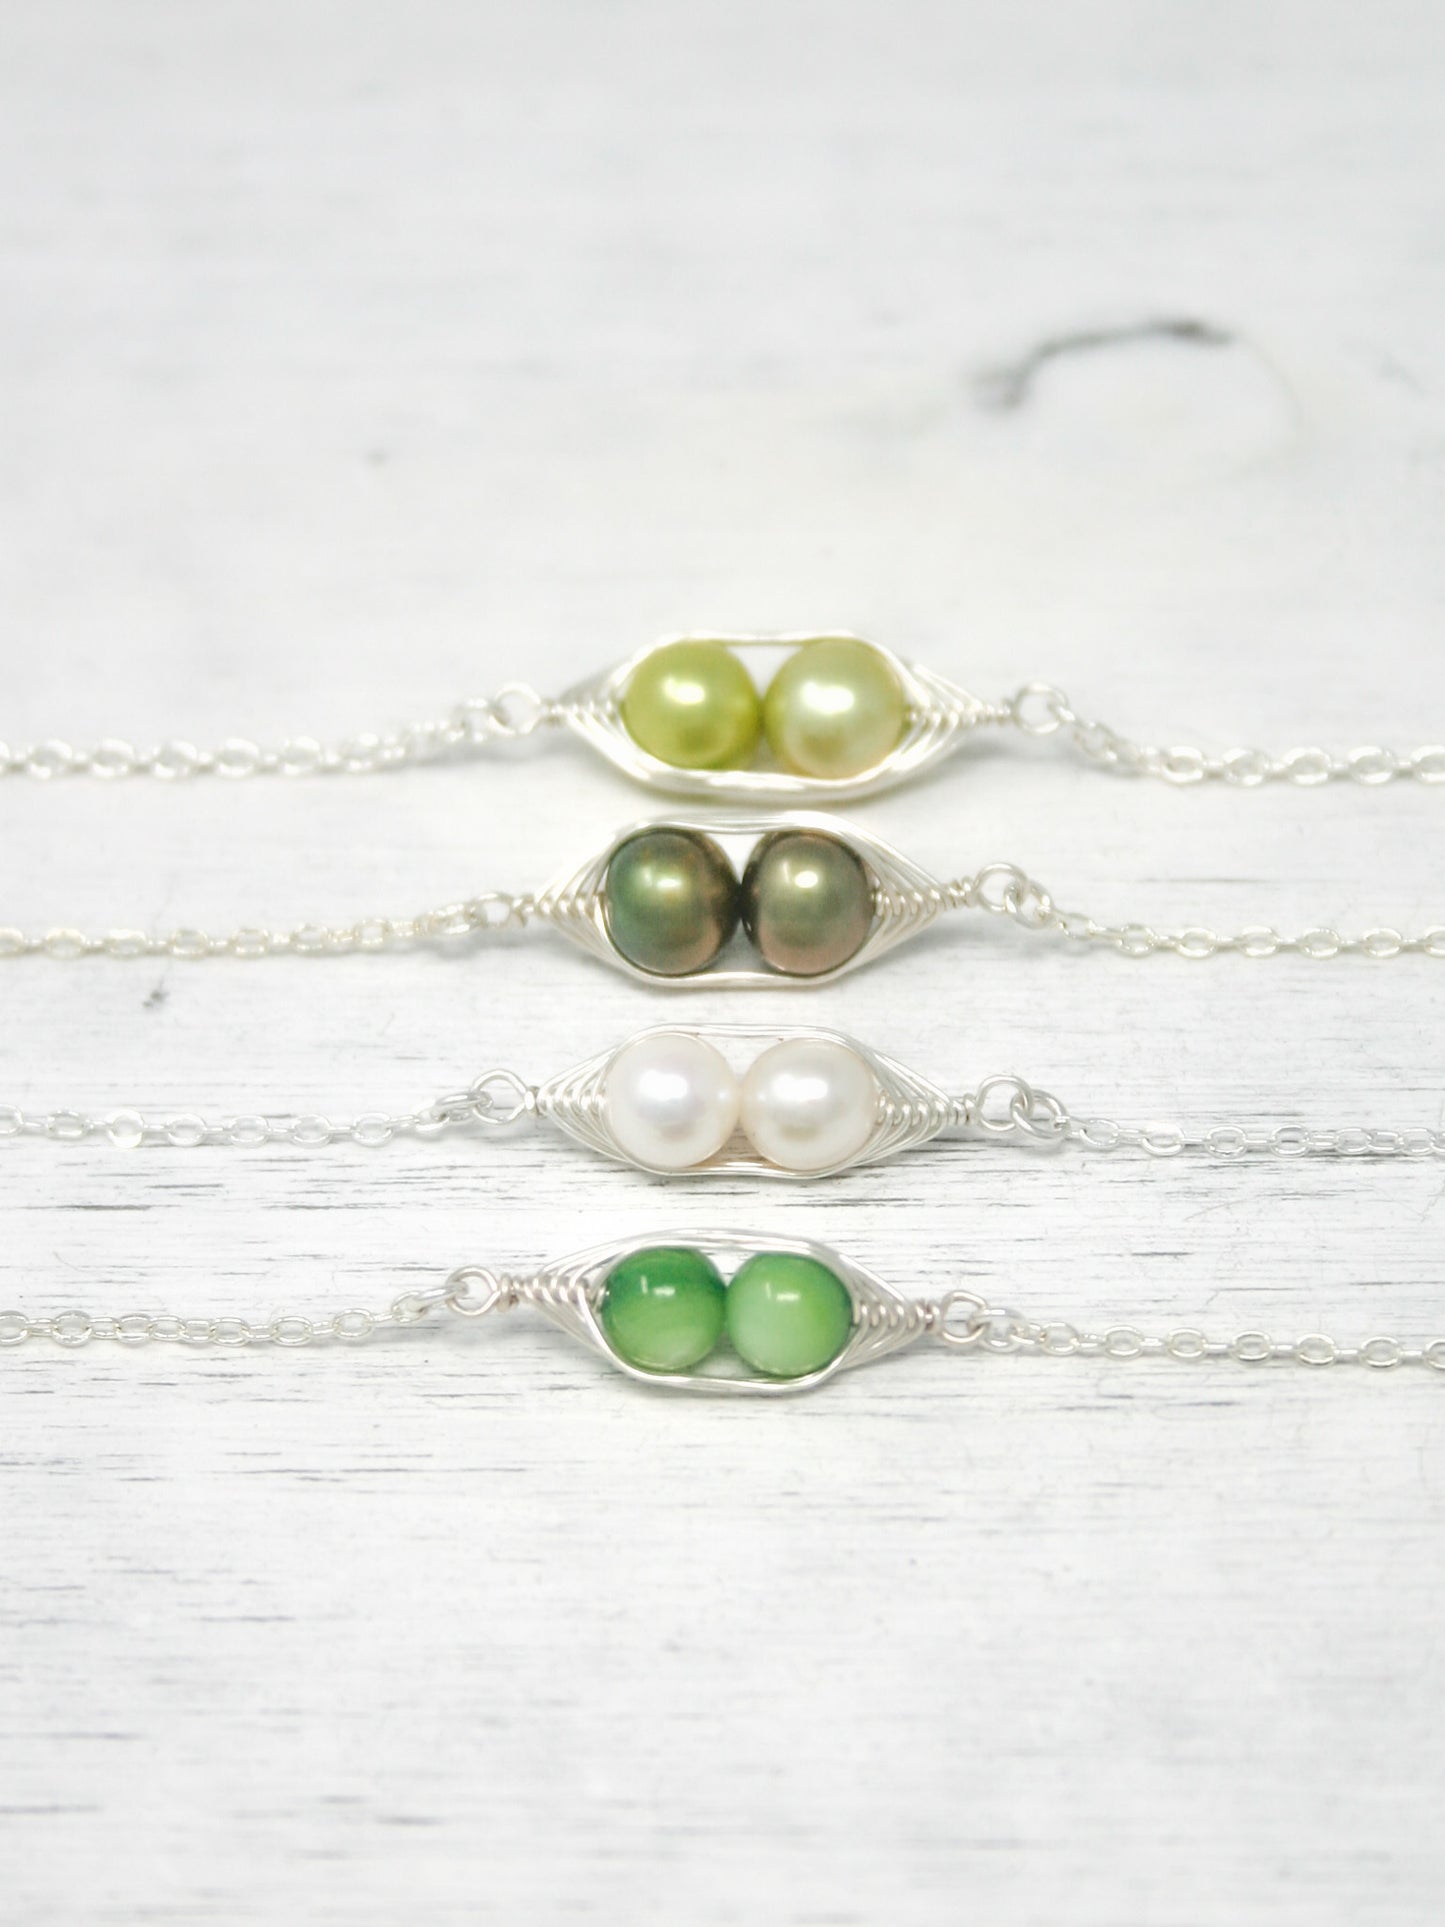 Two peas in a pod bracelet [made to order]